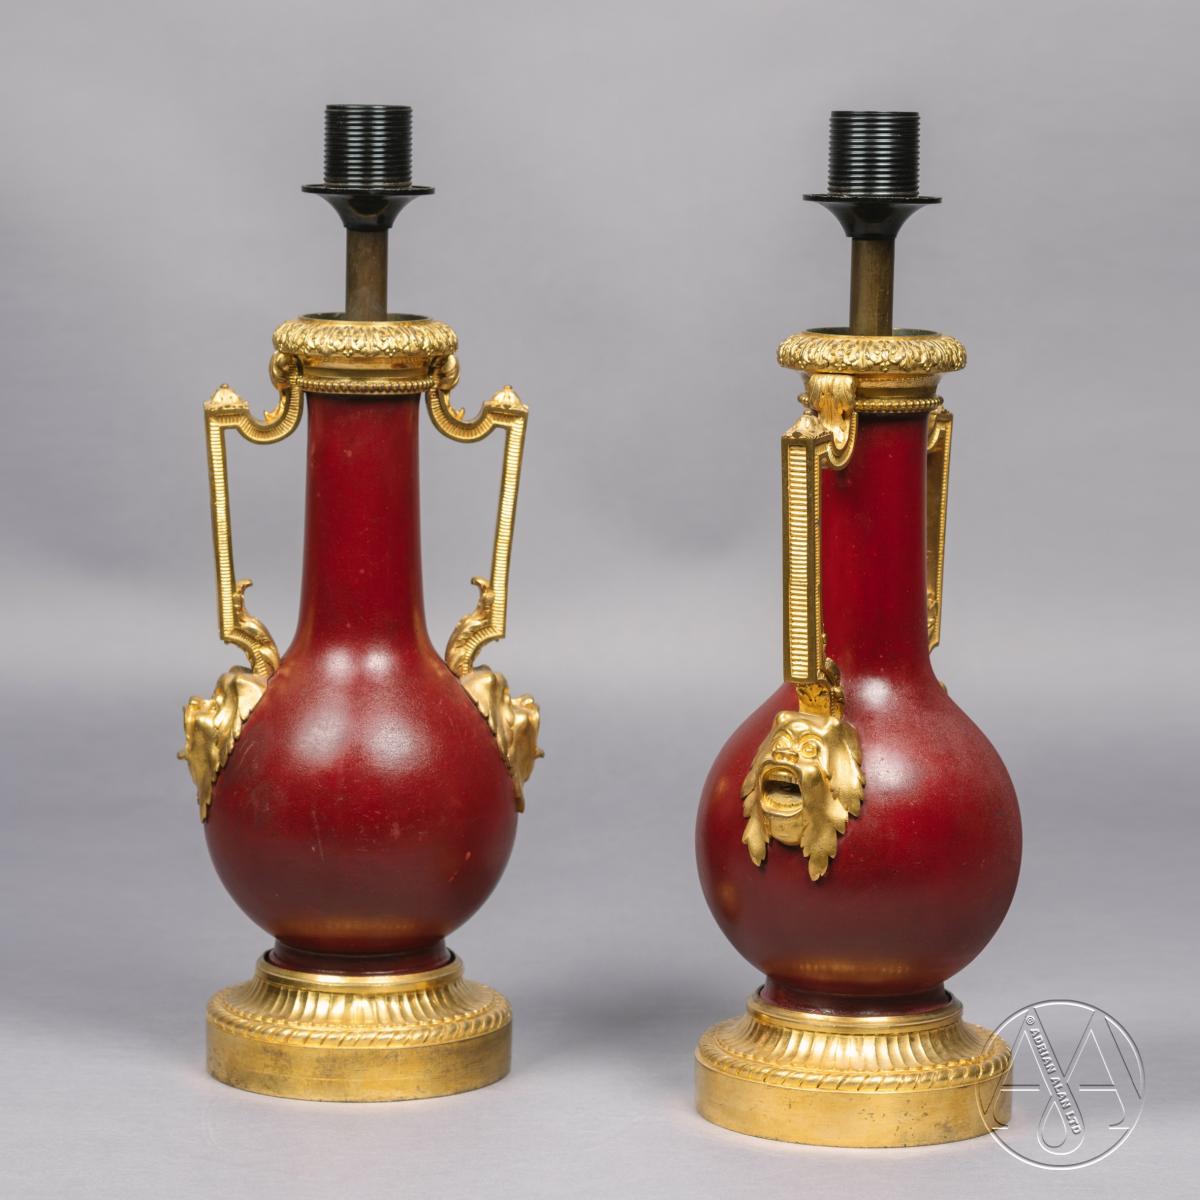 A Pair of Gilt-Bronze Mounted Red Lacquer Vases Adapted as Table Lamps